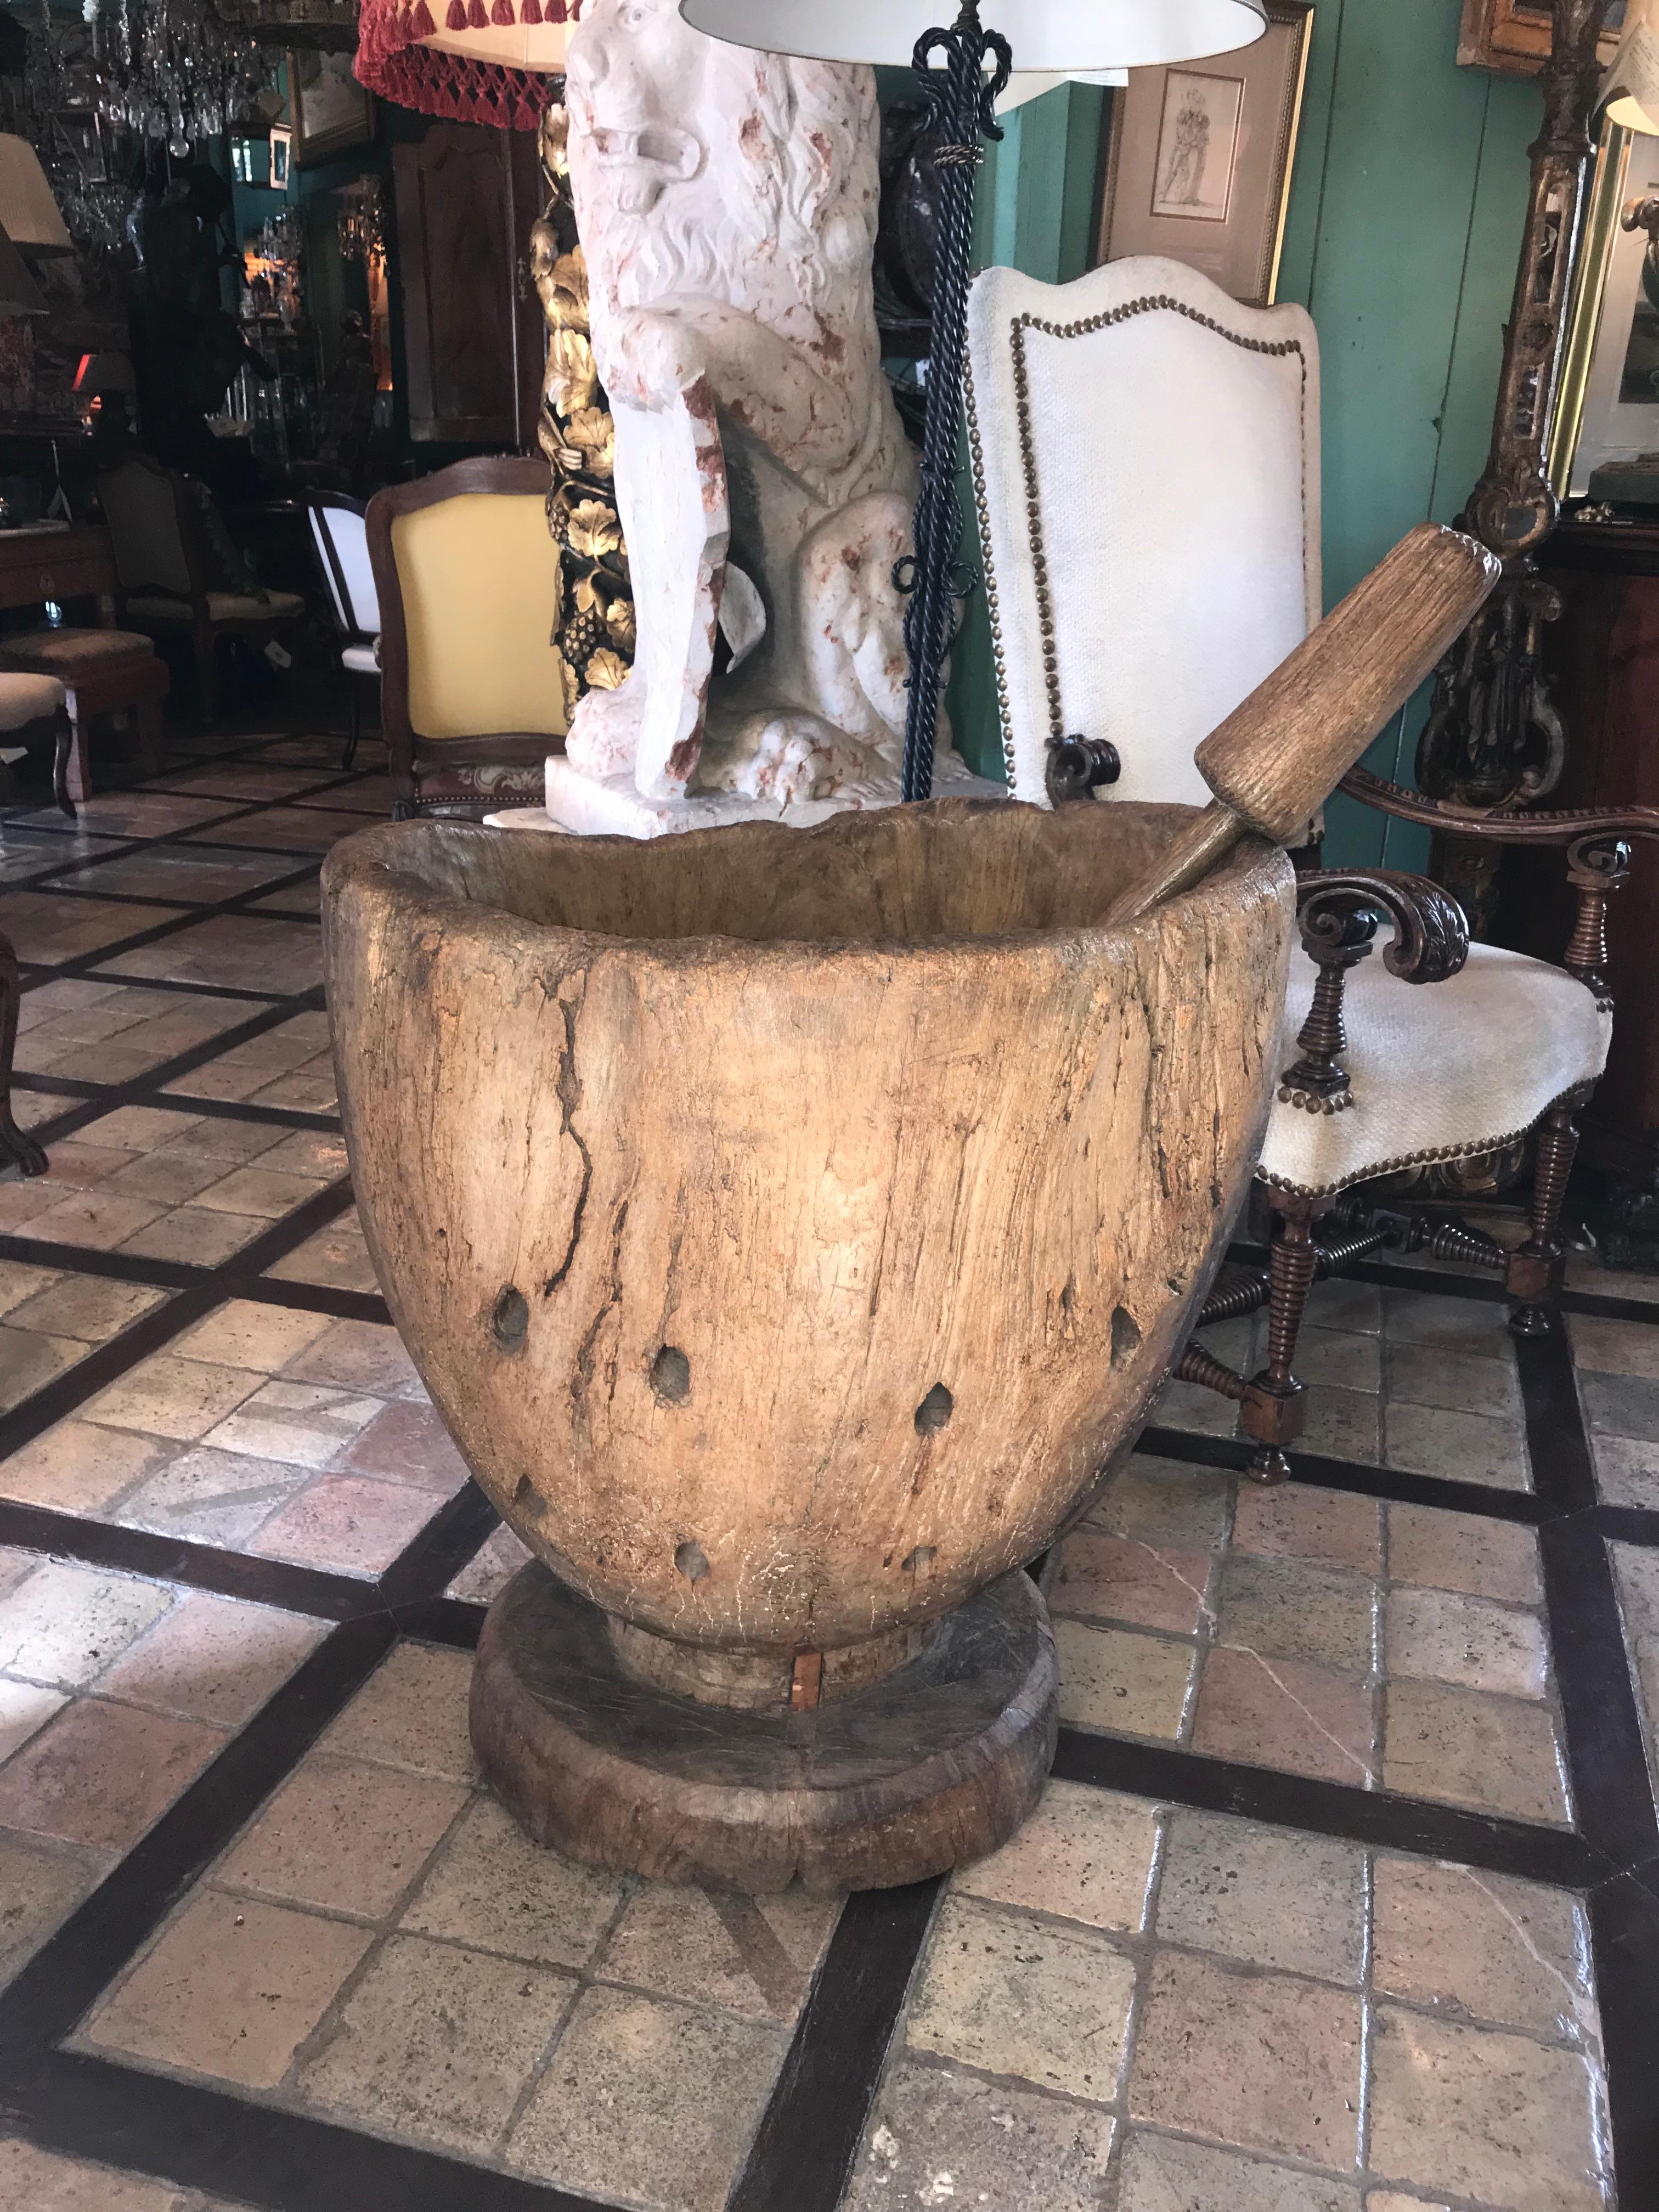 Hand Carved Wood Holder Planter Vase Jardinière Cachepot Decorative Antiques LA  In Good Condition For Sale In West Hollywood, CA